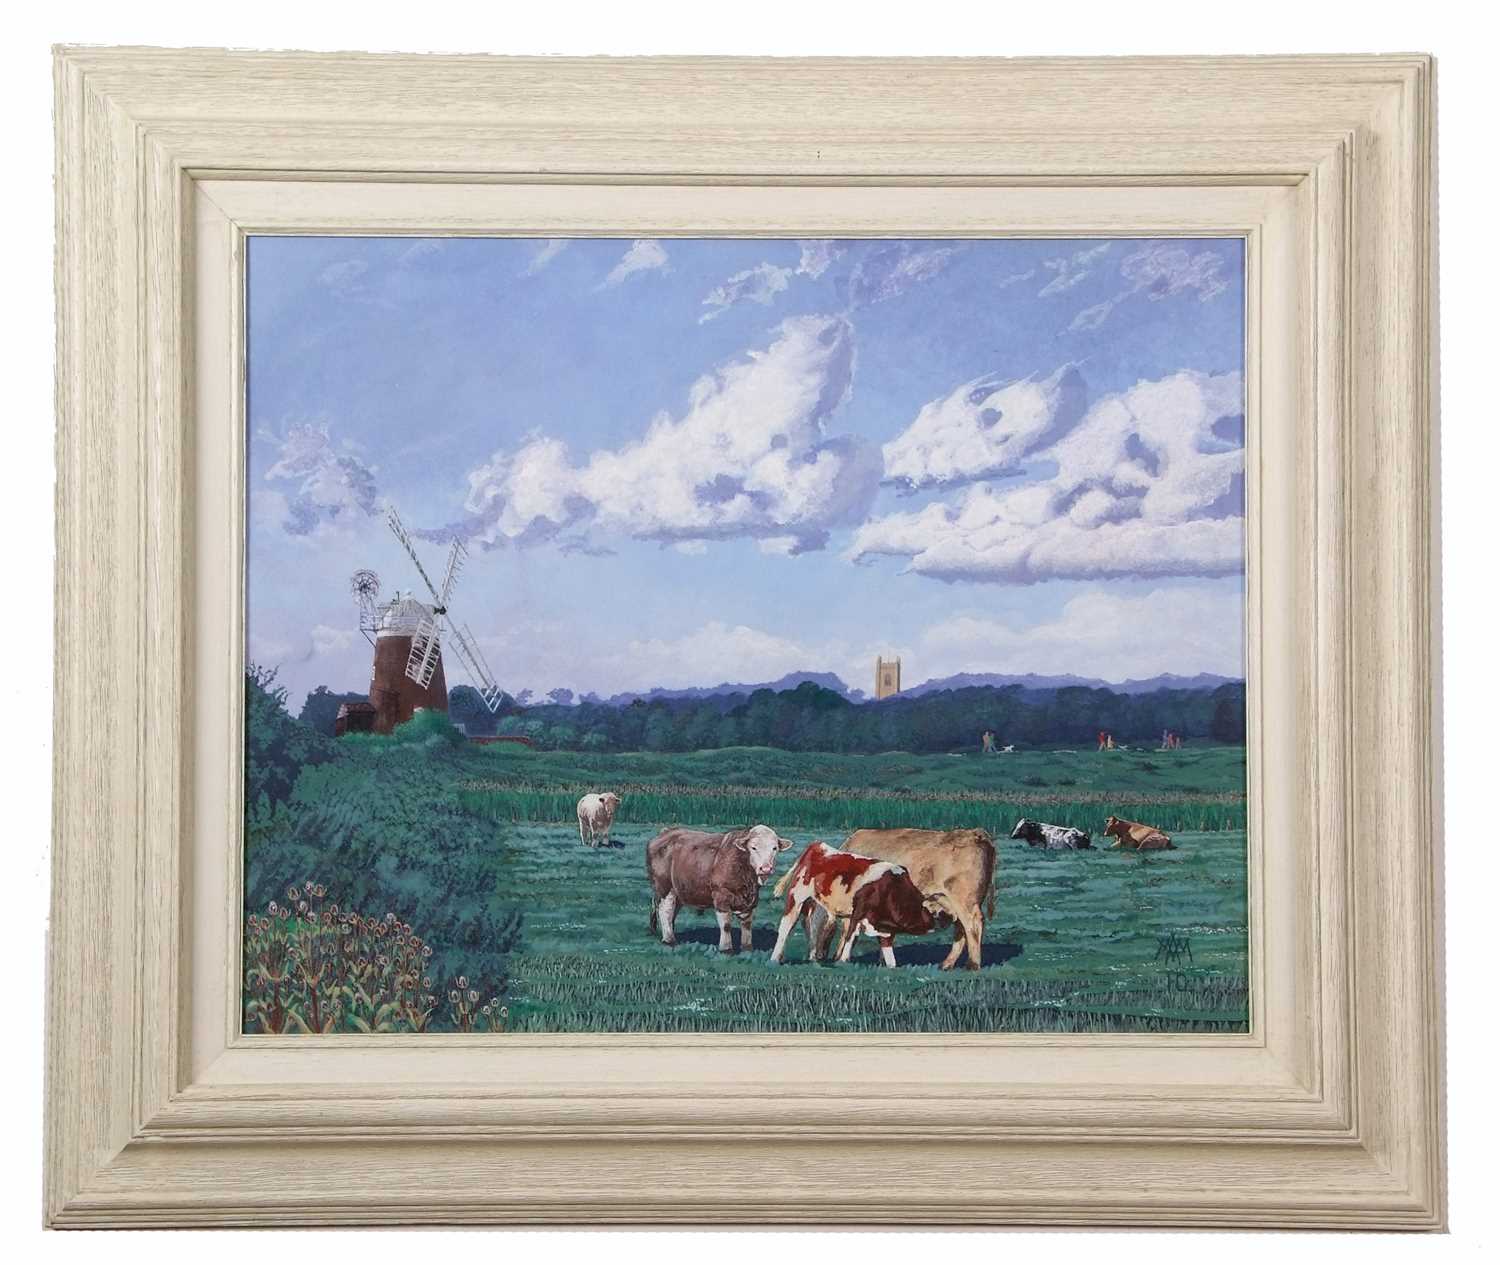 Michael Morley (British, b.1937), "Cattle before Cley Mill", acrylic on board, monogrammed, 16x19. - Image 2 of 2